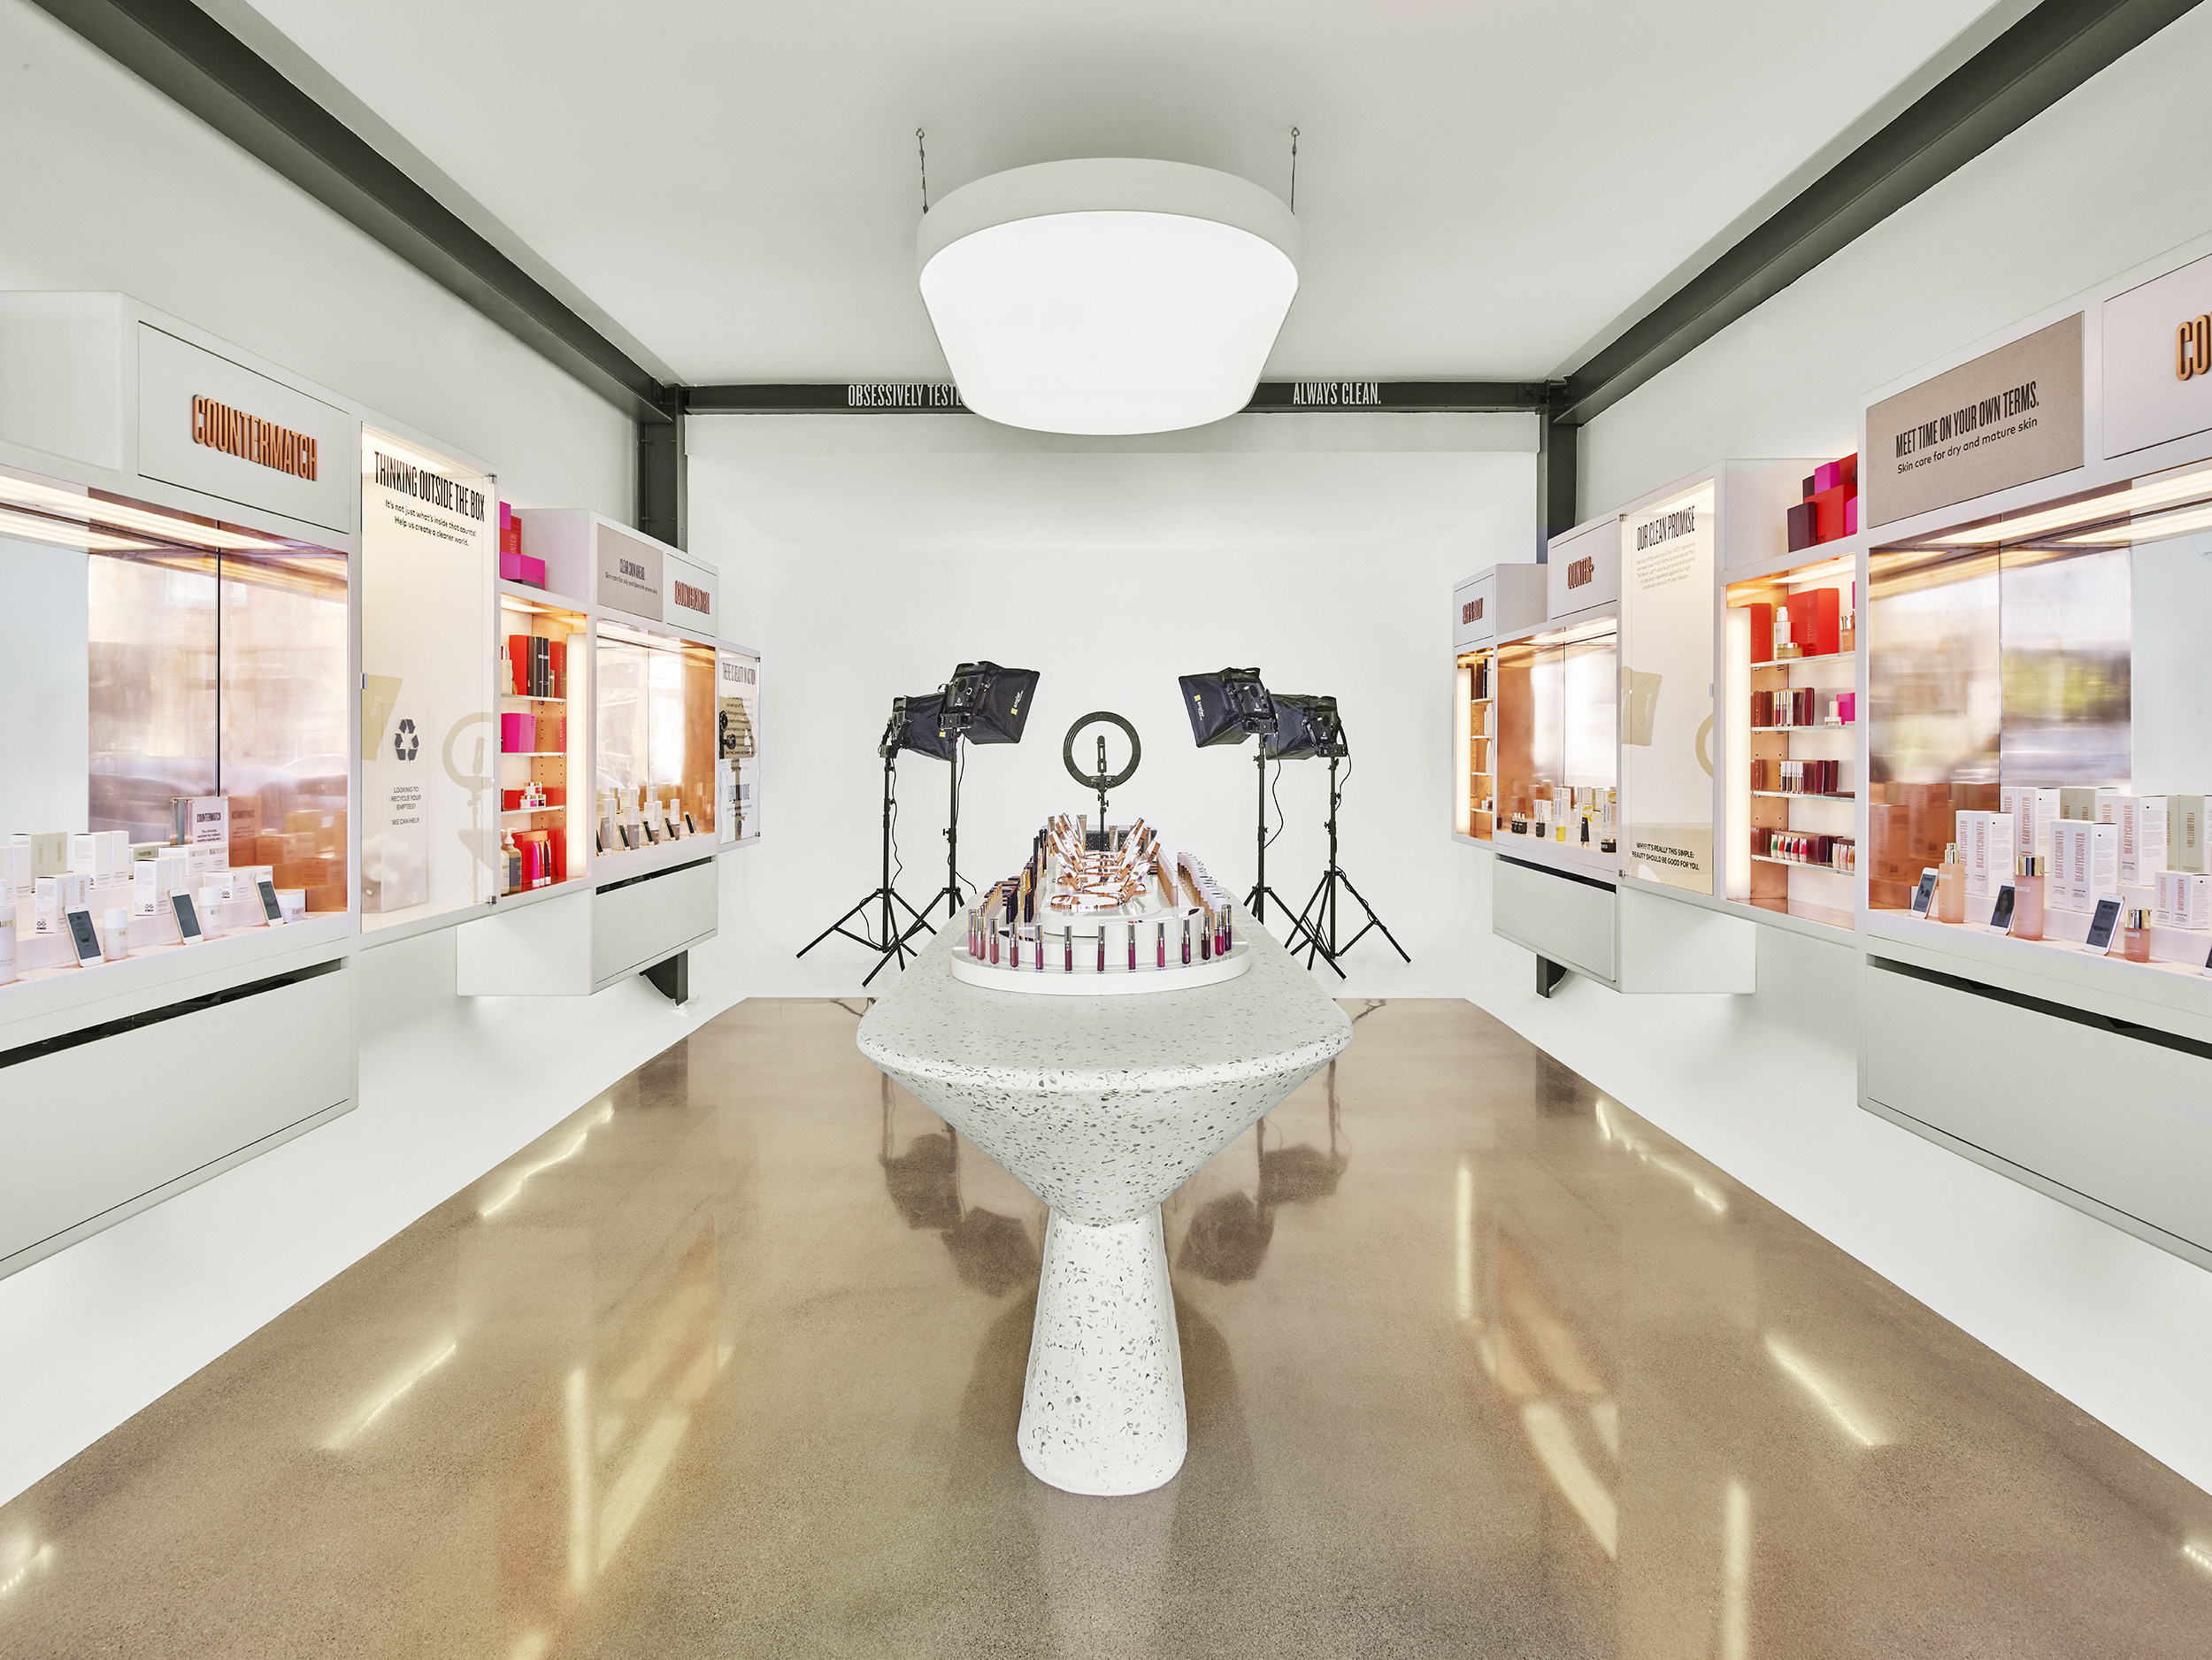 Beautycounter Blends Store, Livestream Studio at New Location - Los Angeles  Business Journal